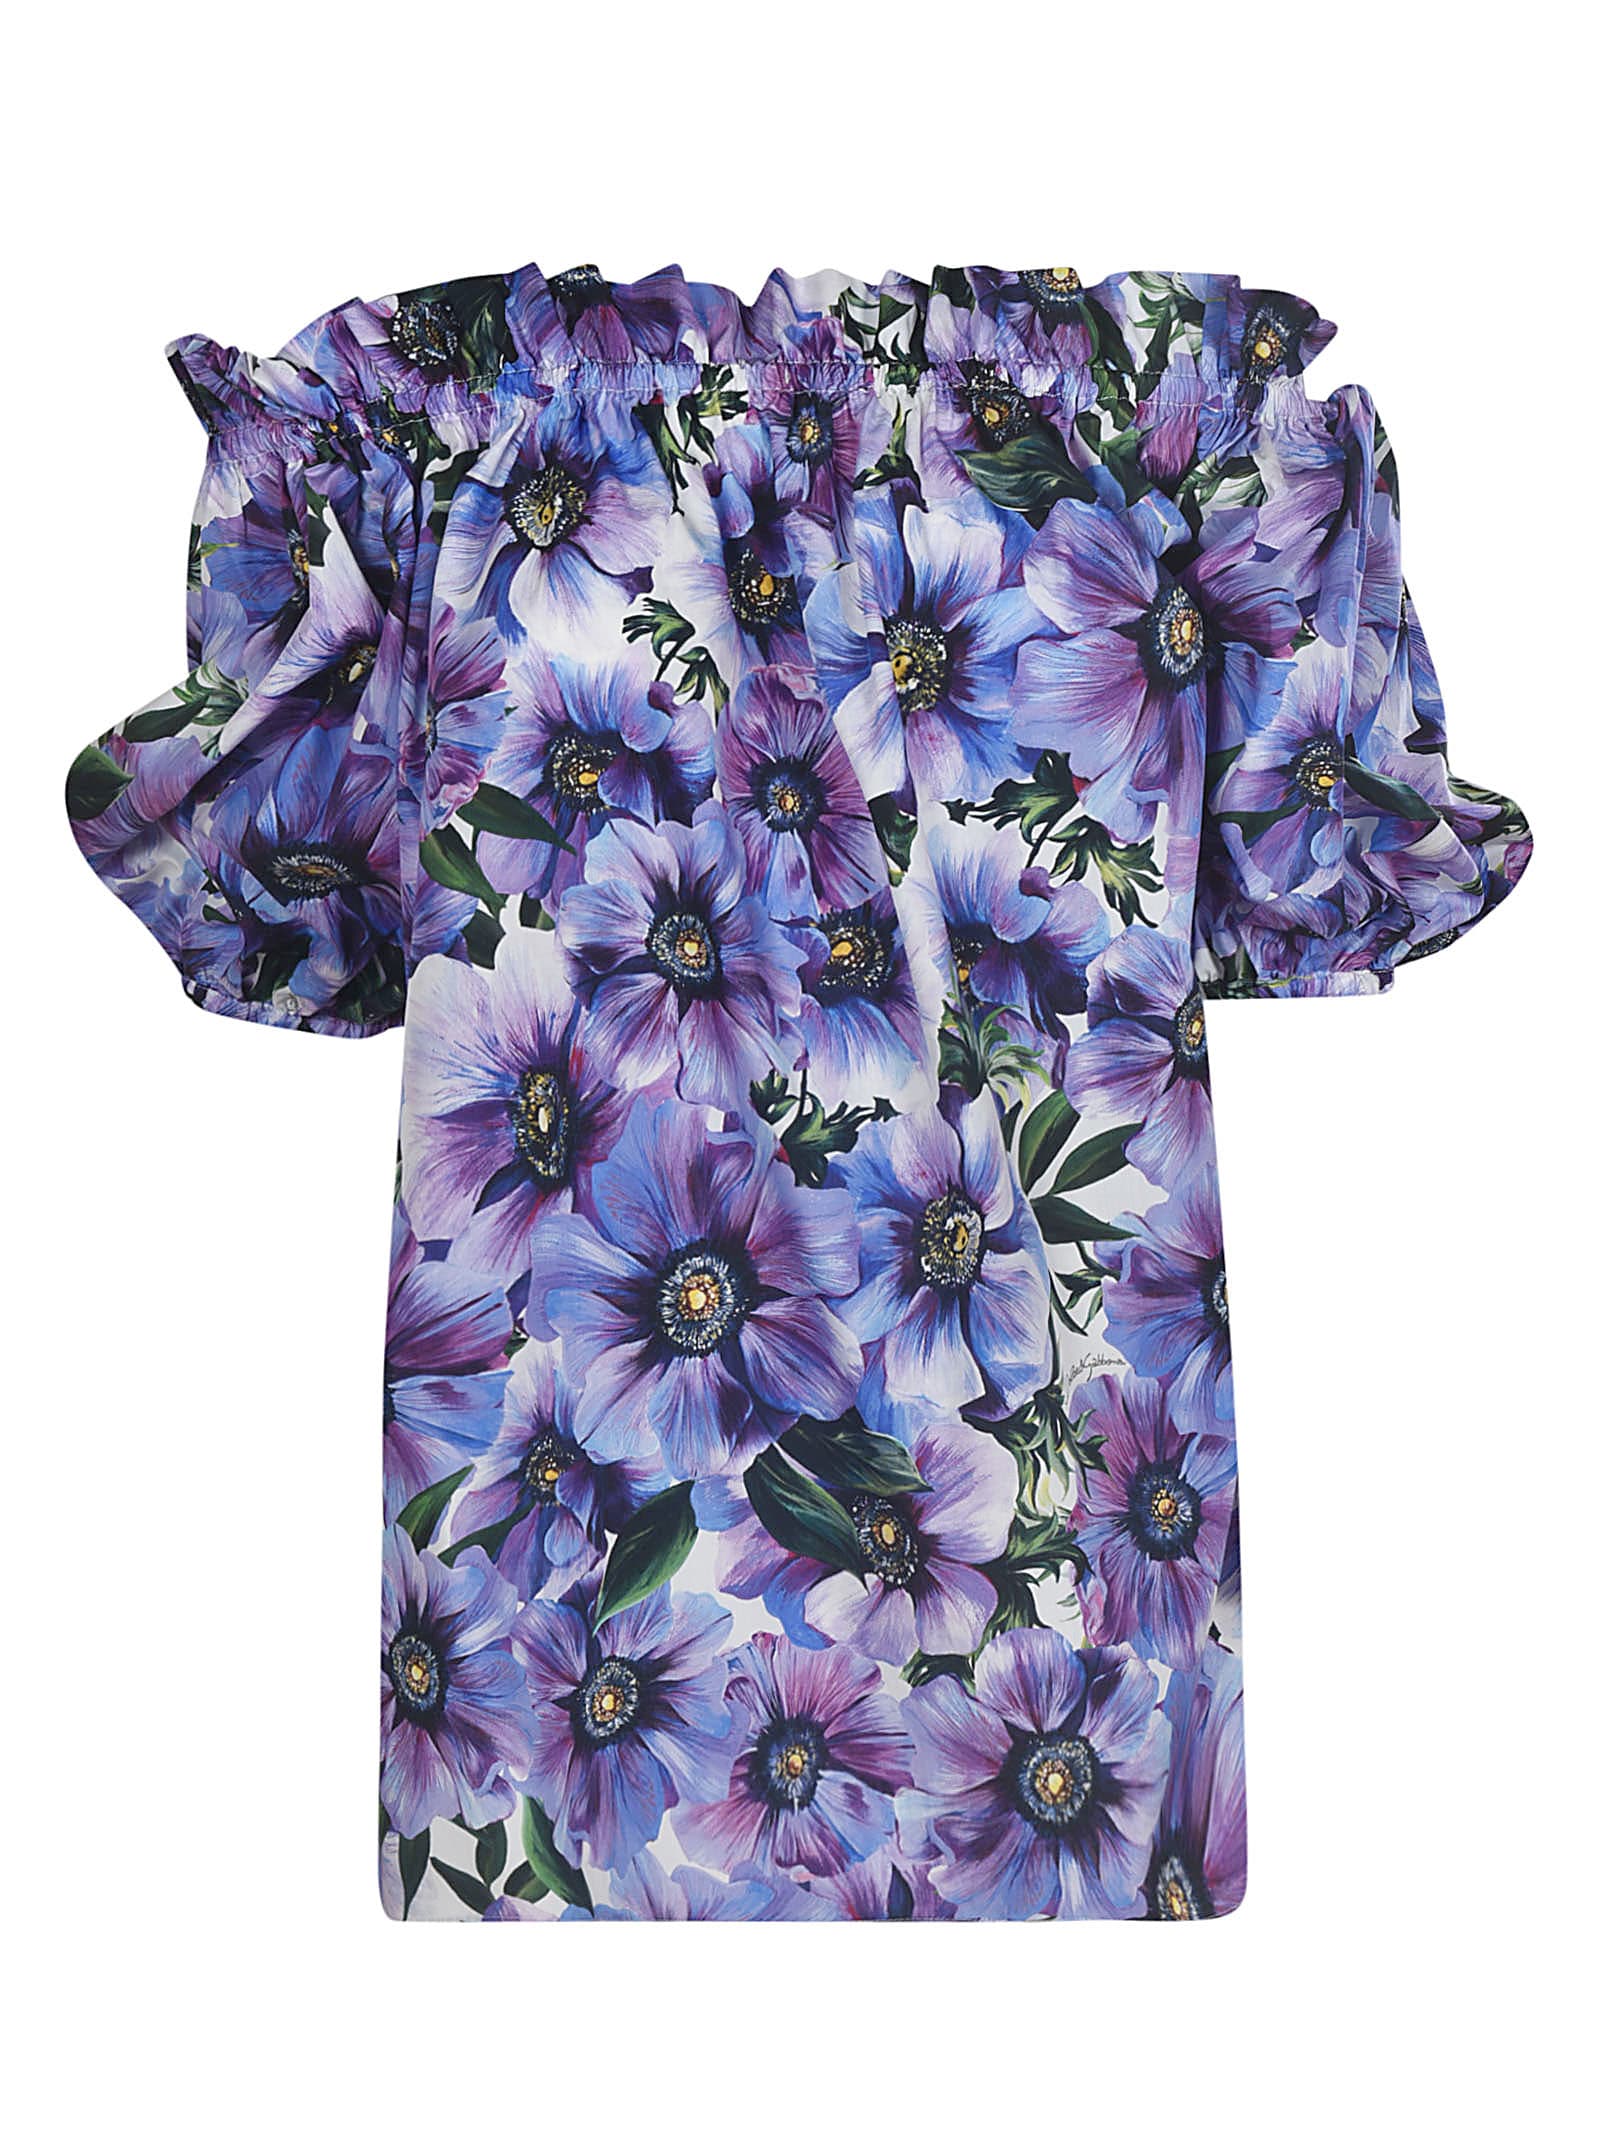 DOLCE & GABBANA FLORAL PRINTED BLOUSE,11260772